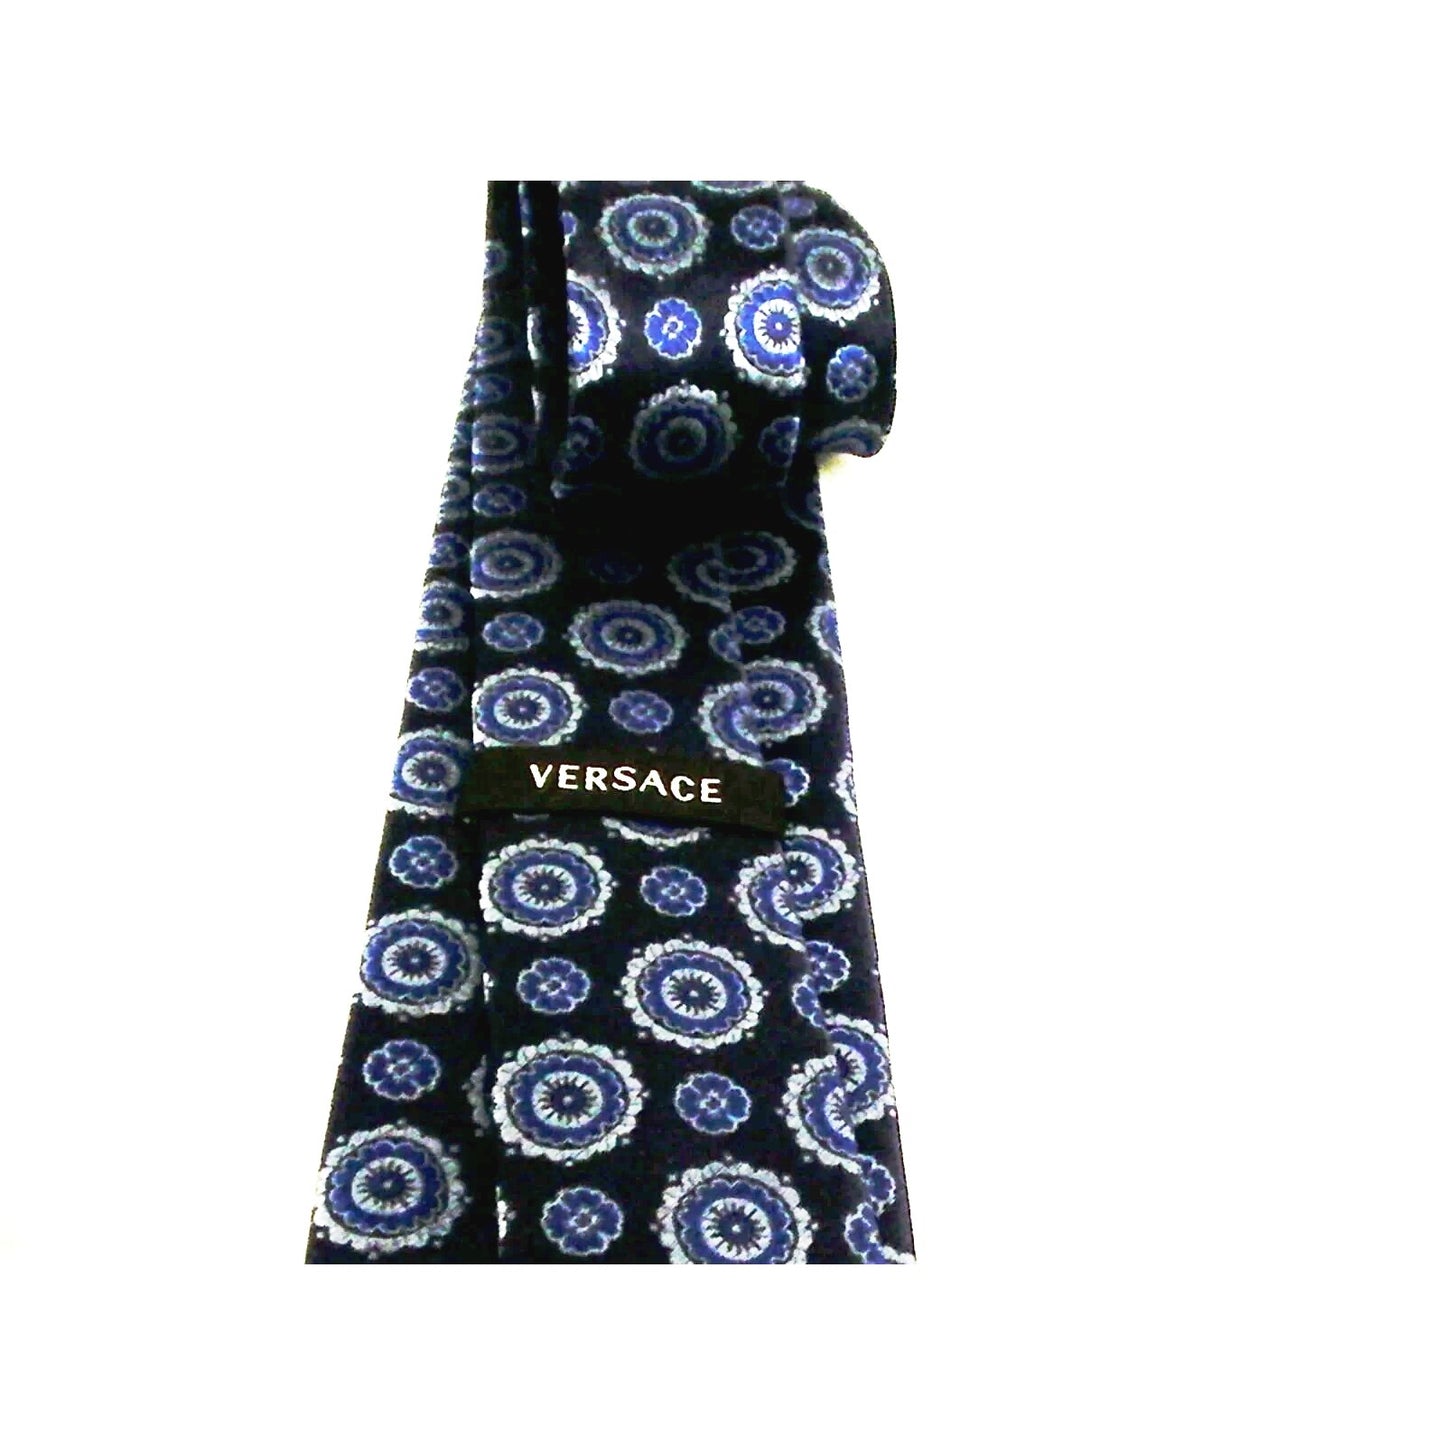 GIANNI VERSACE MEDUSA / Men's 100% silk Blue made in Italy - Classic Fashion DealsGIANNI VERSACE MEDUSA / Men's 100% silk Blue made in ItalytieVersaceClassic Fashion DealsGIANNI VERSACE MEDUSA / Men's 100% silk Blue made in Italy